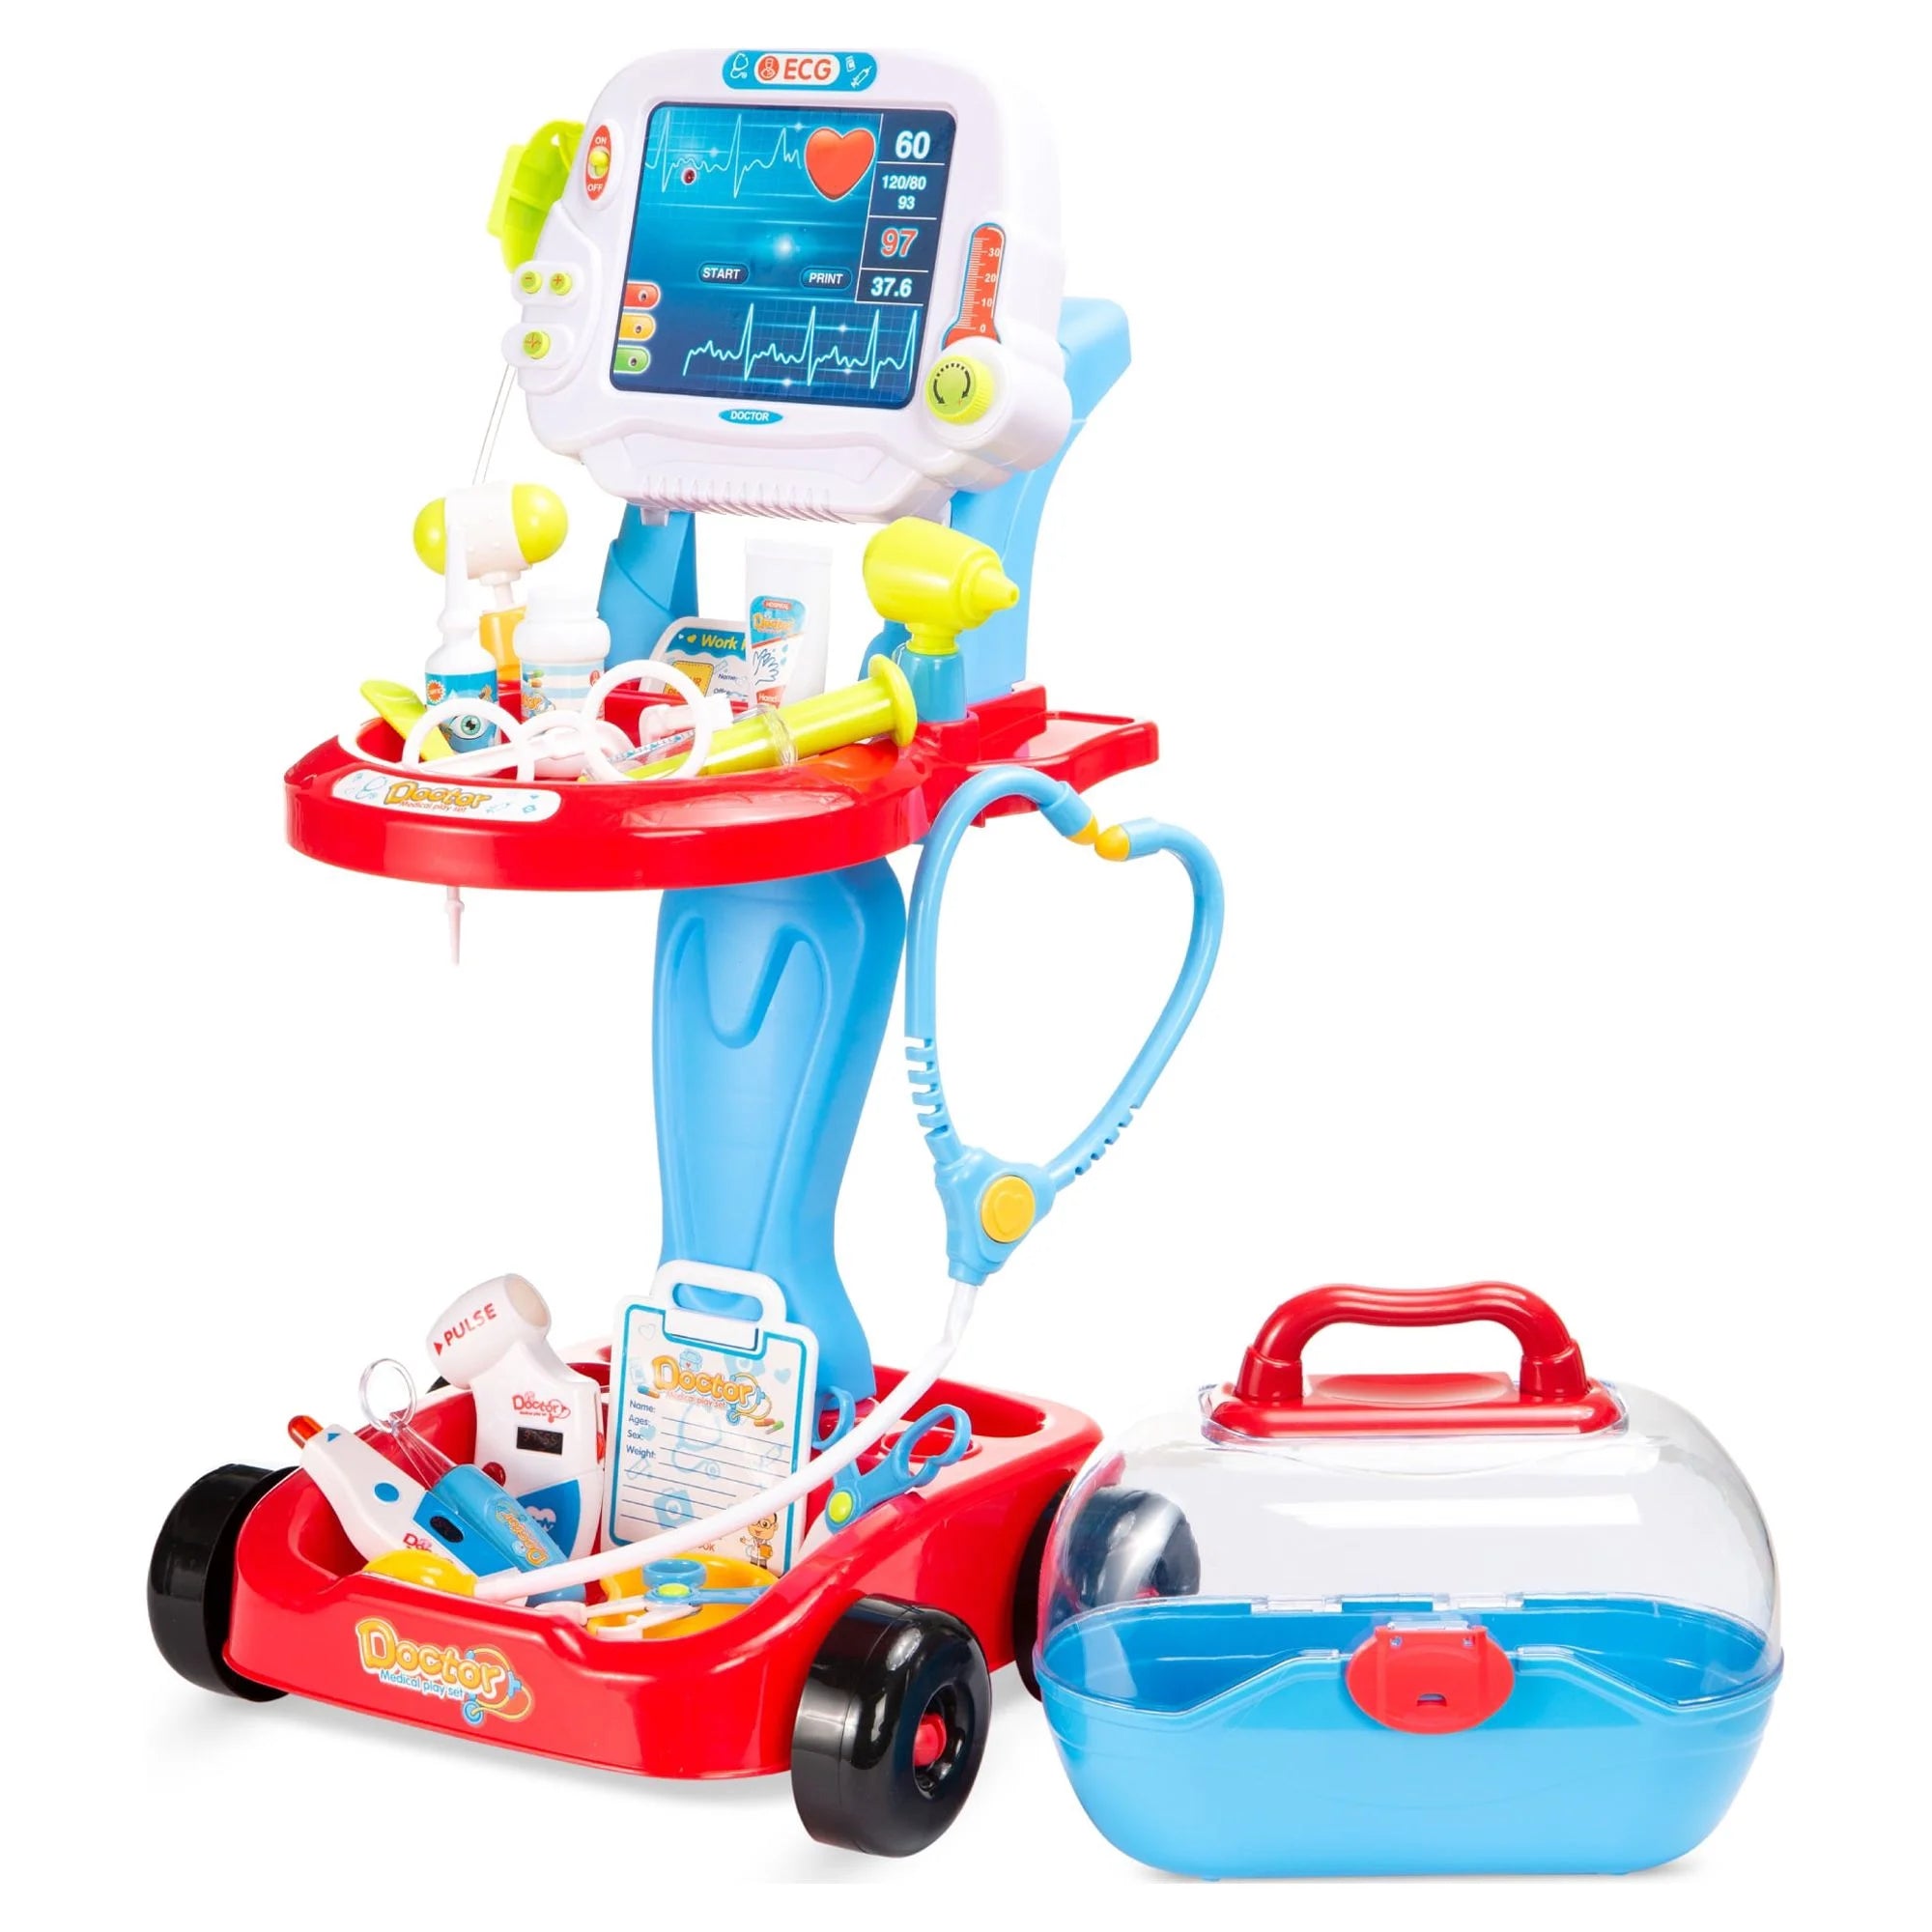 Kids Pretend Medical Station Set with Carrying Case